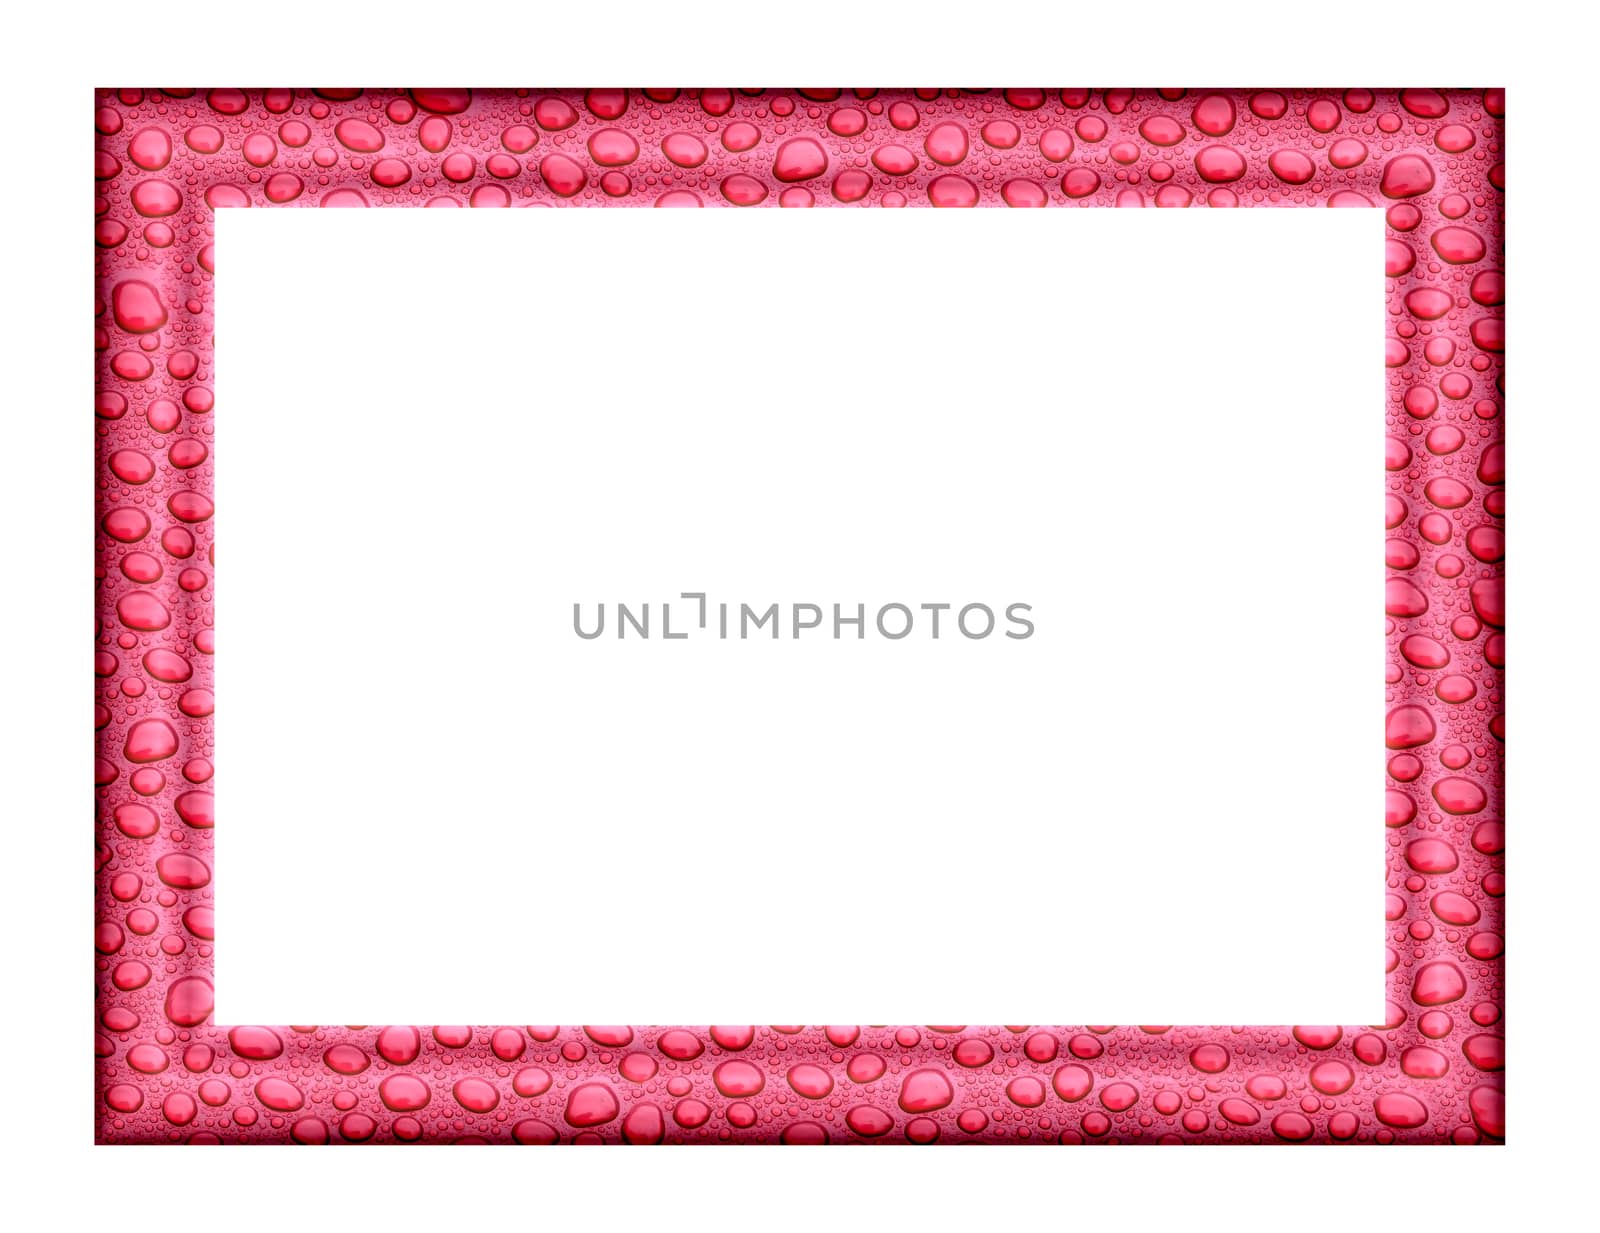 Rectangular frame with water drops isolated on white background